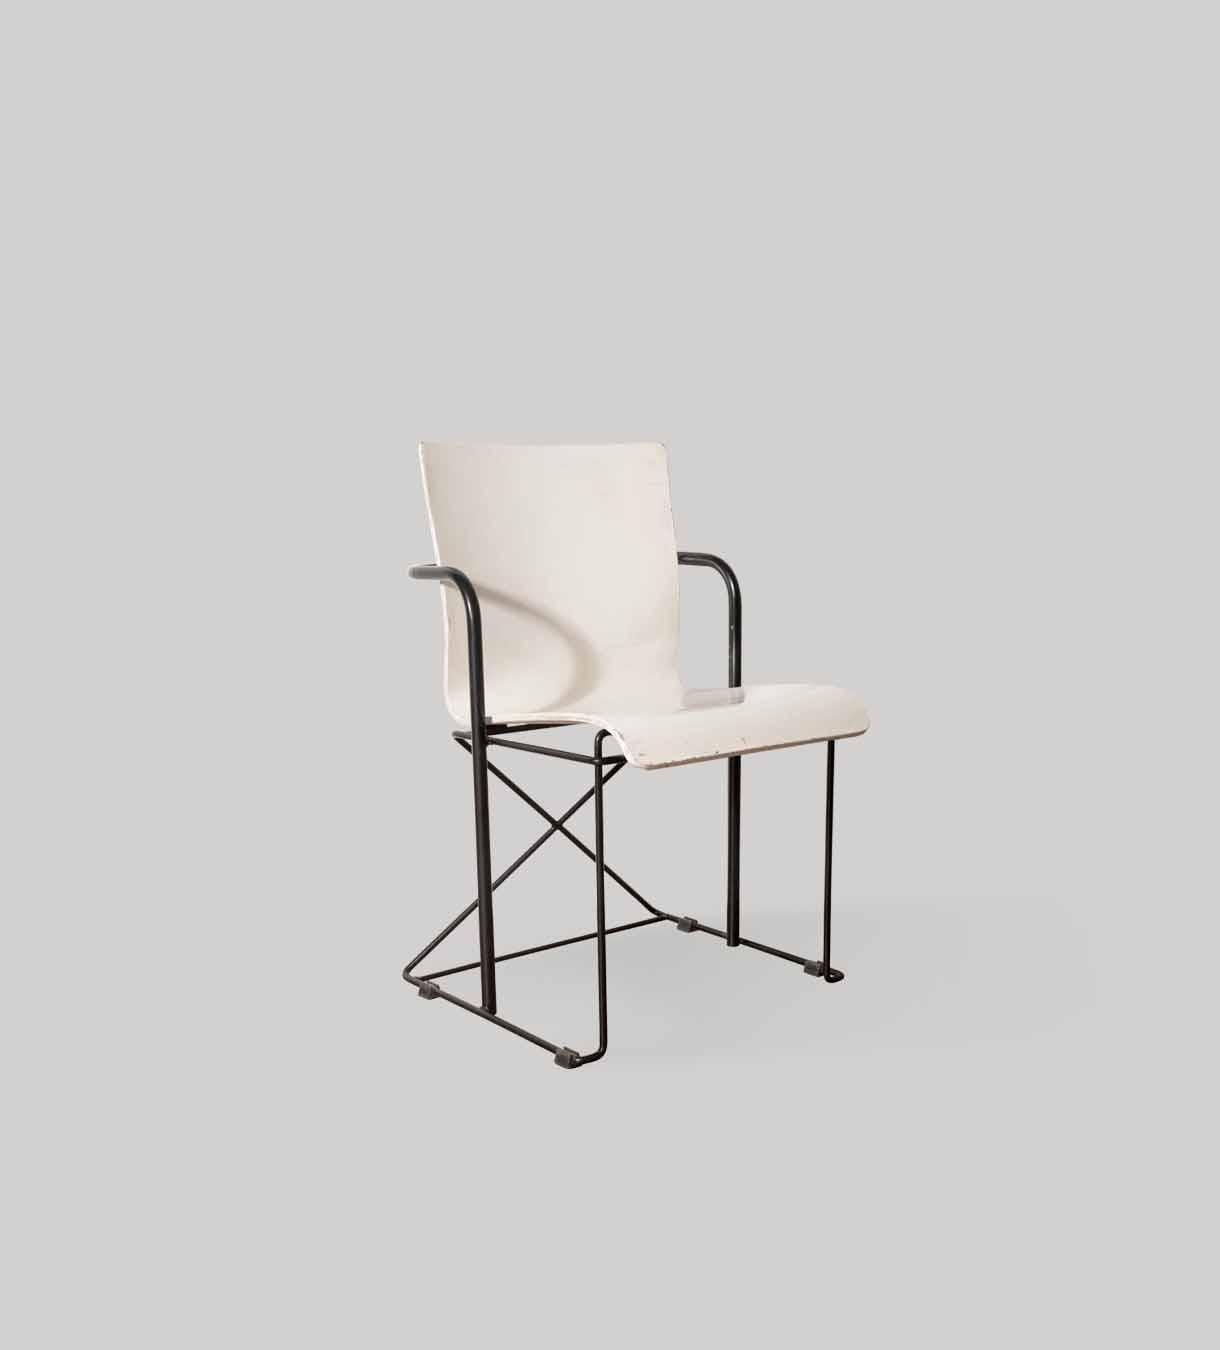 Late 20th Century Modern White Bentwood and Black Metal Base Chair, France, circa 1980